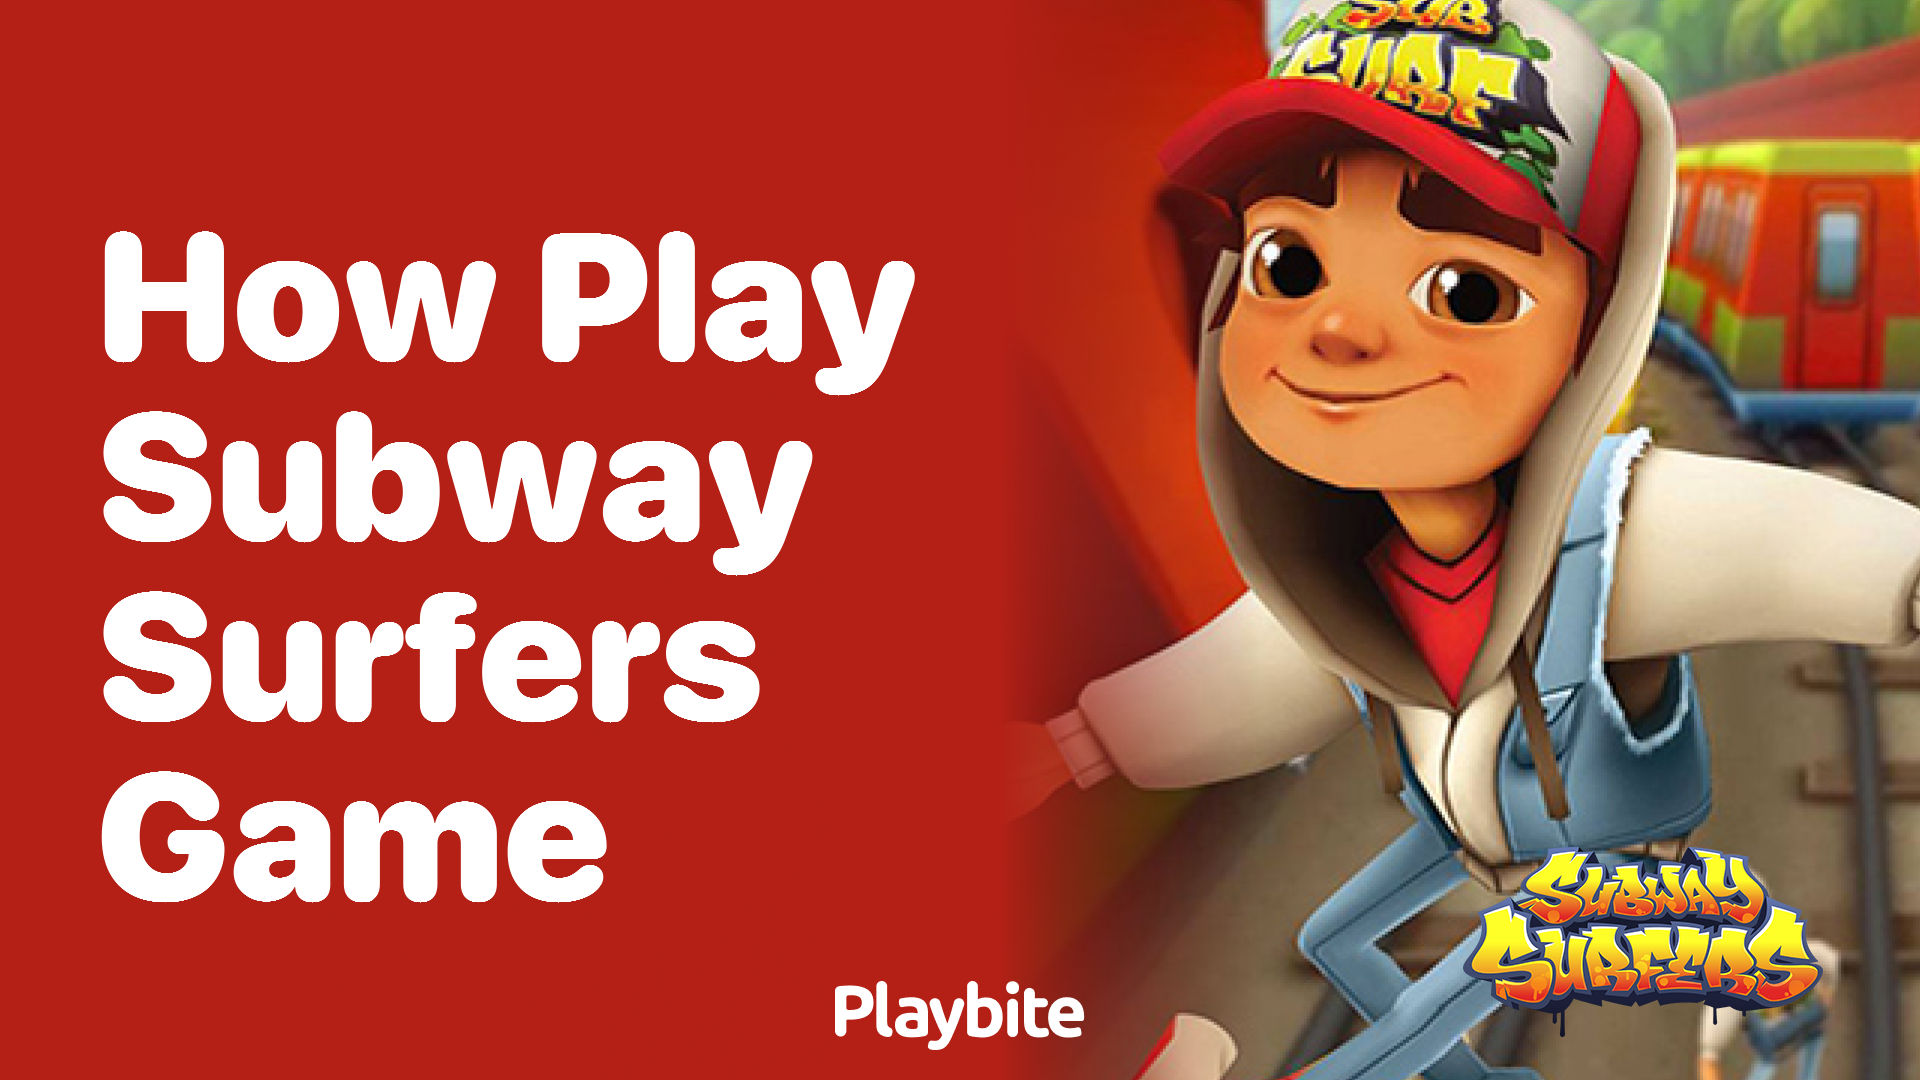 How to Play Subway Surfers Game